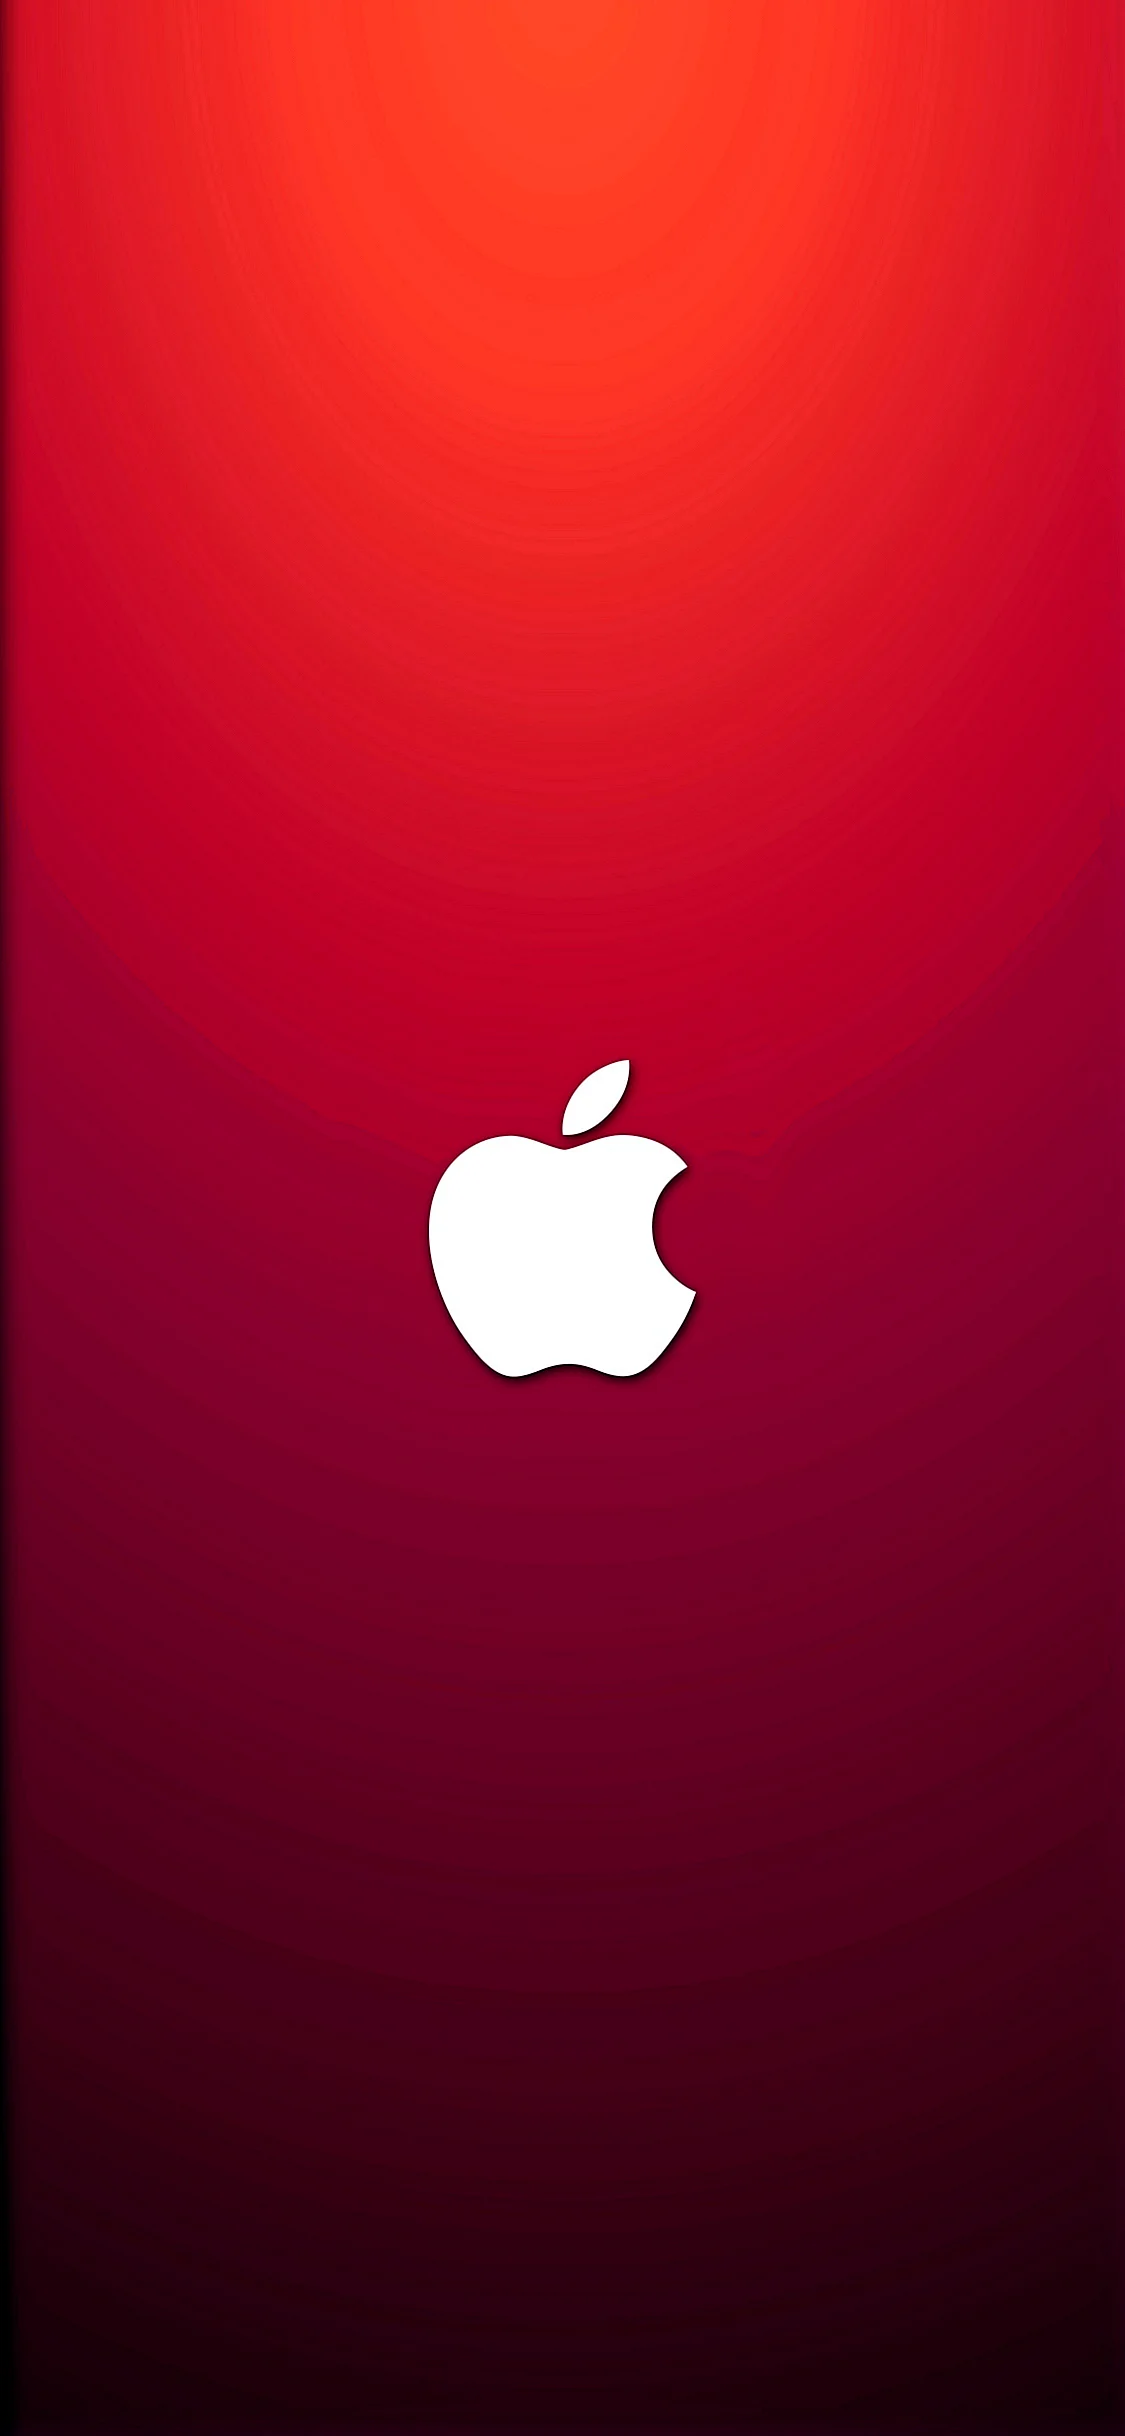 Apple Wallpaper for iPhone 11 Pro